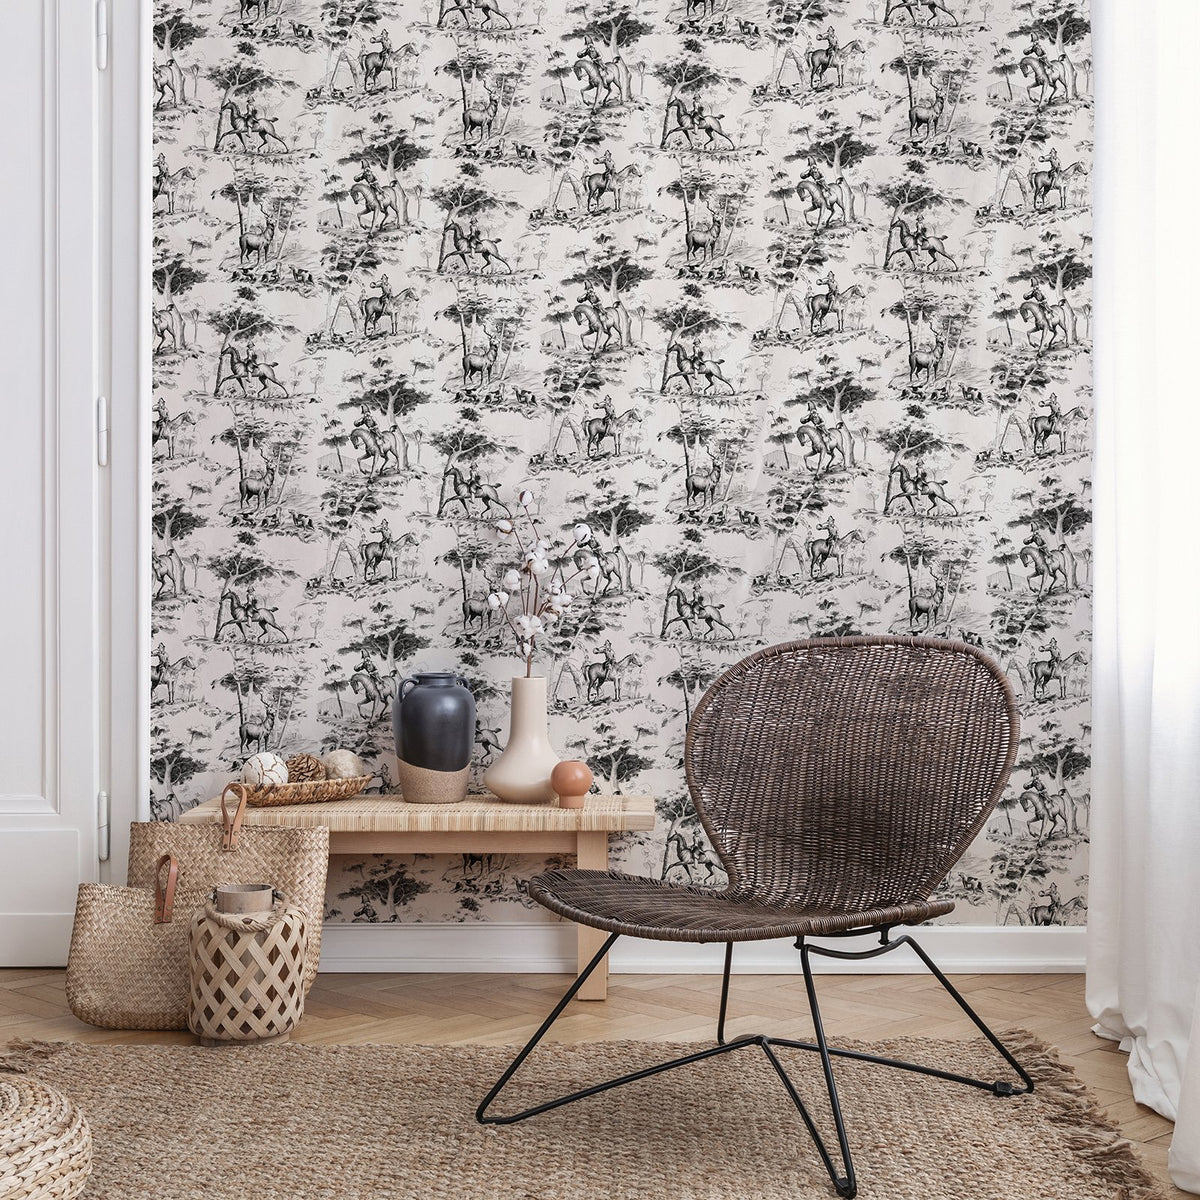 MRV-56 La Chasse wallpaper by Mr. and Mrs Vintage for NLXL